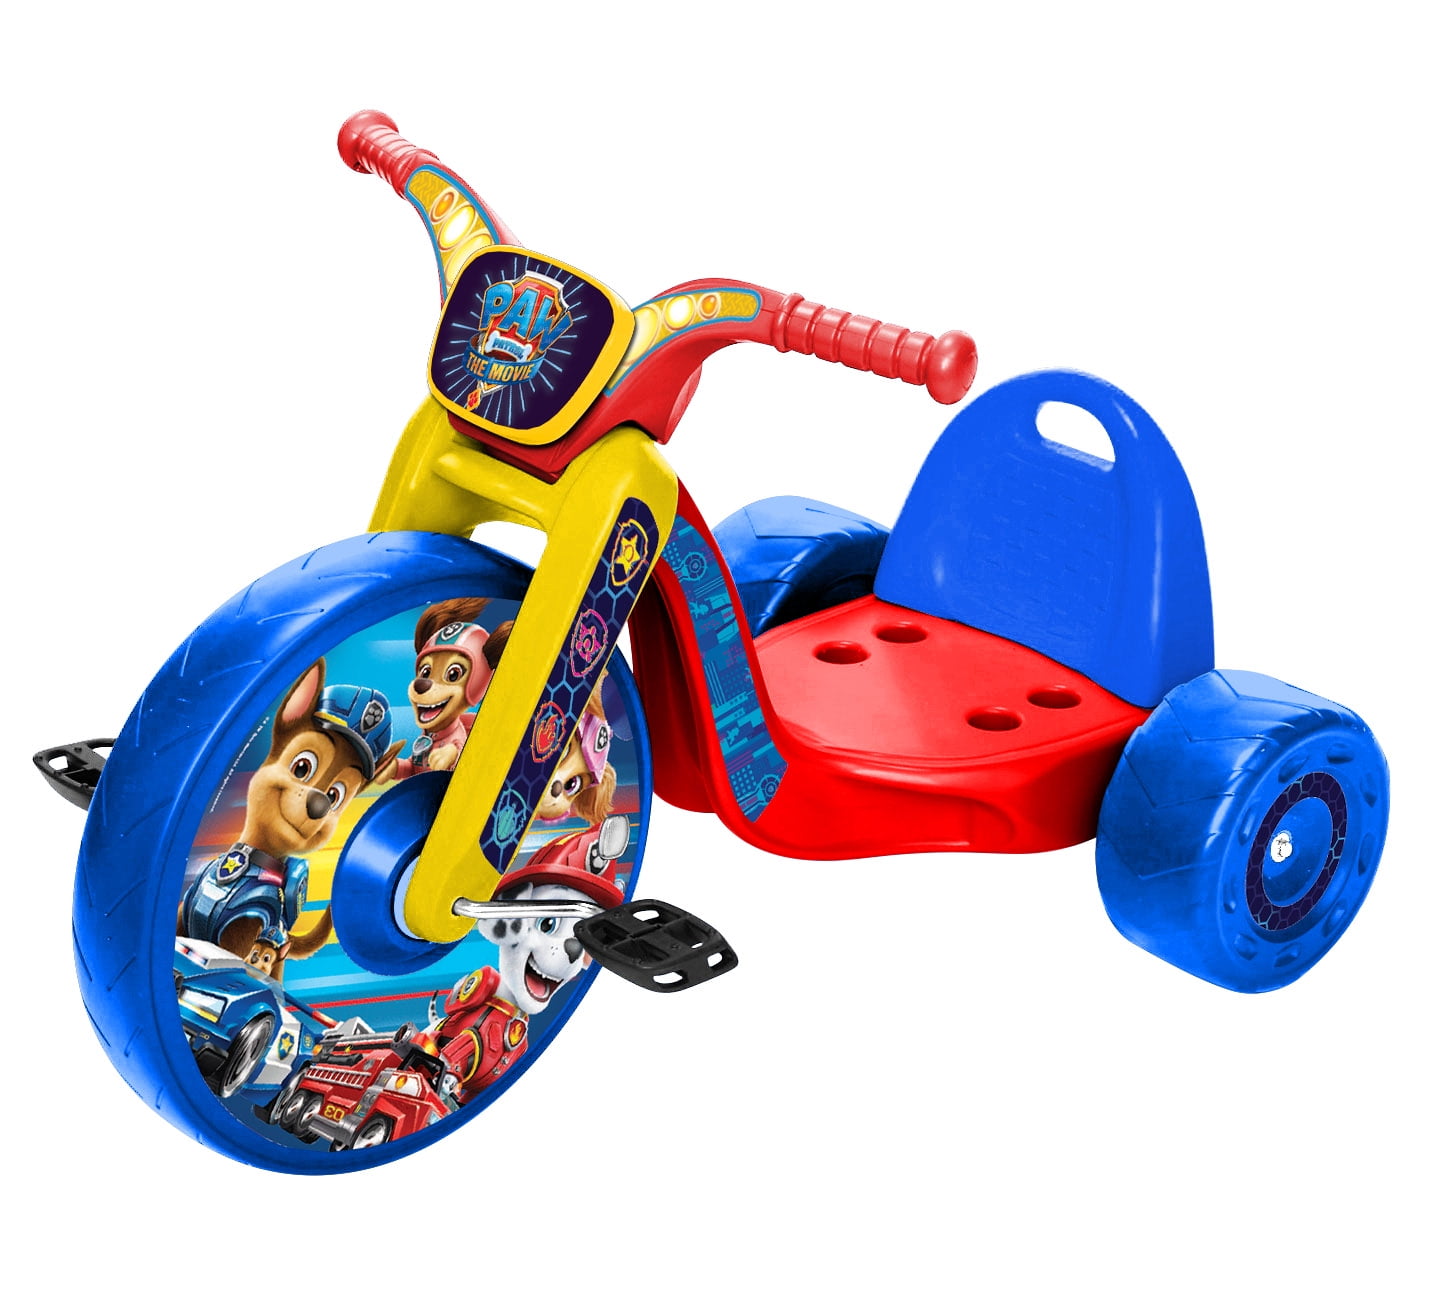 Paw Patrol Movie Ride-On 10 Fly Wheels Tricycle with Sounds for Kids 33”-35” Tall and up to 35 Lbs Ages 2-4 Toddler Bike Trike 